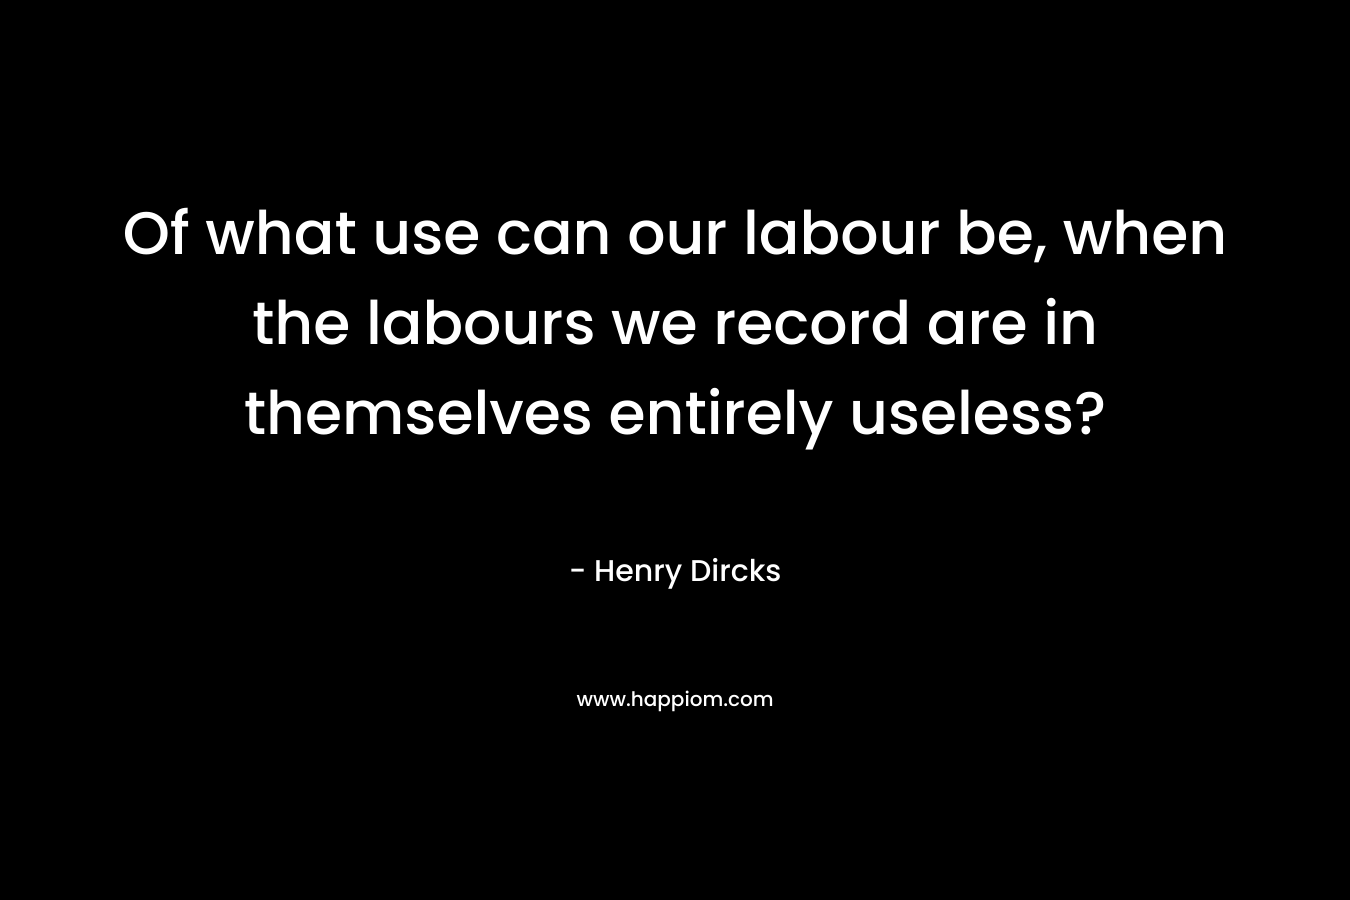 Of what use can our labour be, when the labours we record are in themselves entirely useless?